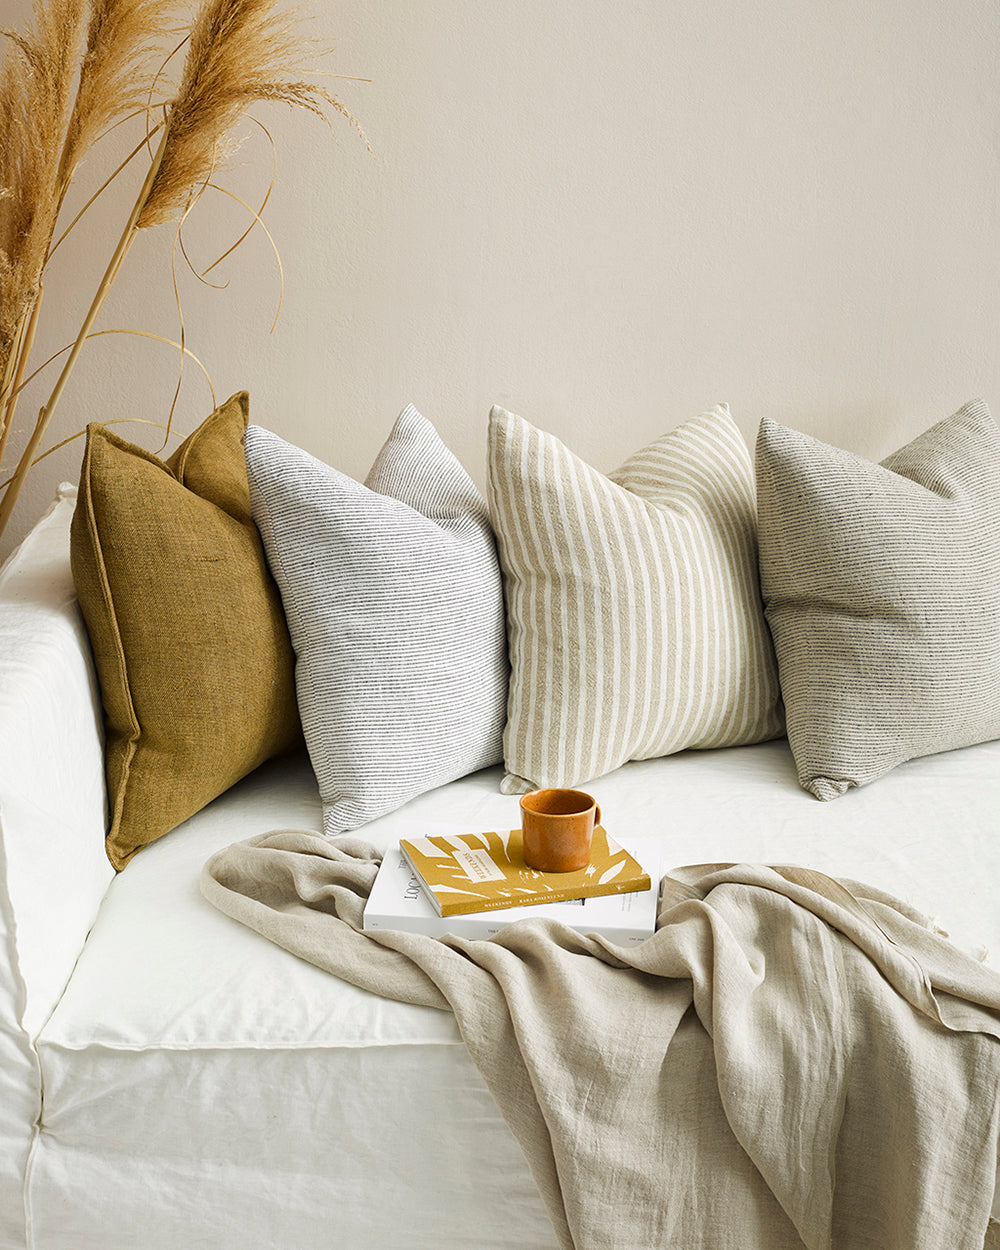 Flaxmill linen cushions in fenugreek and white matching cushions on an ivory sofa